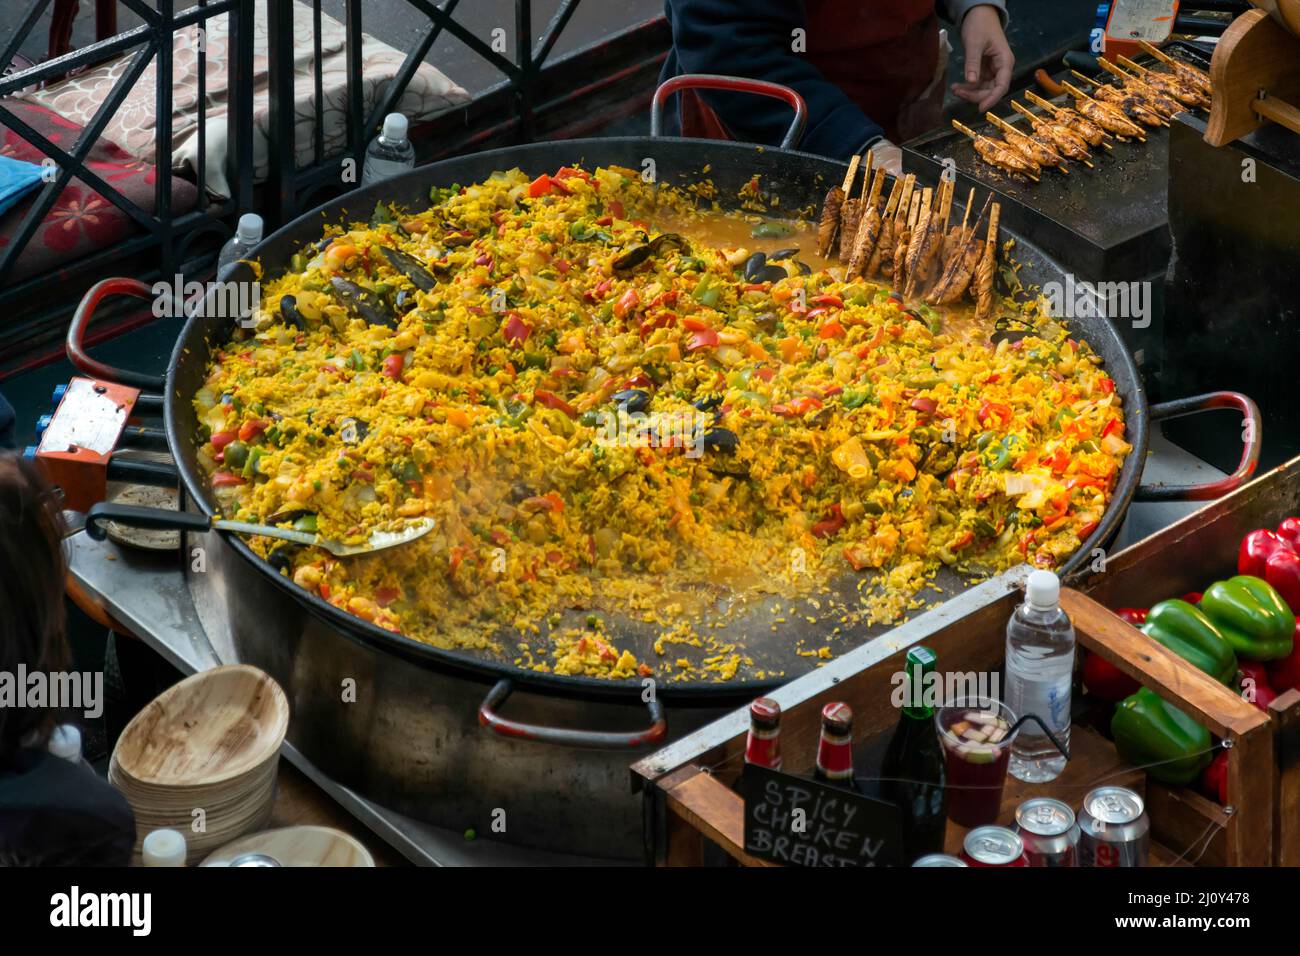 LONDON - NOVEMBER 3 : Paella for sale in Covent Garden  London on November 3, 2013. Unidentified person Stock Photo